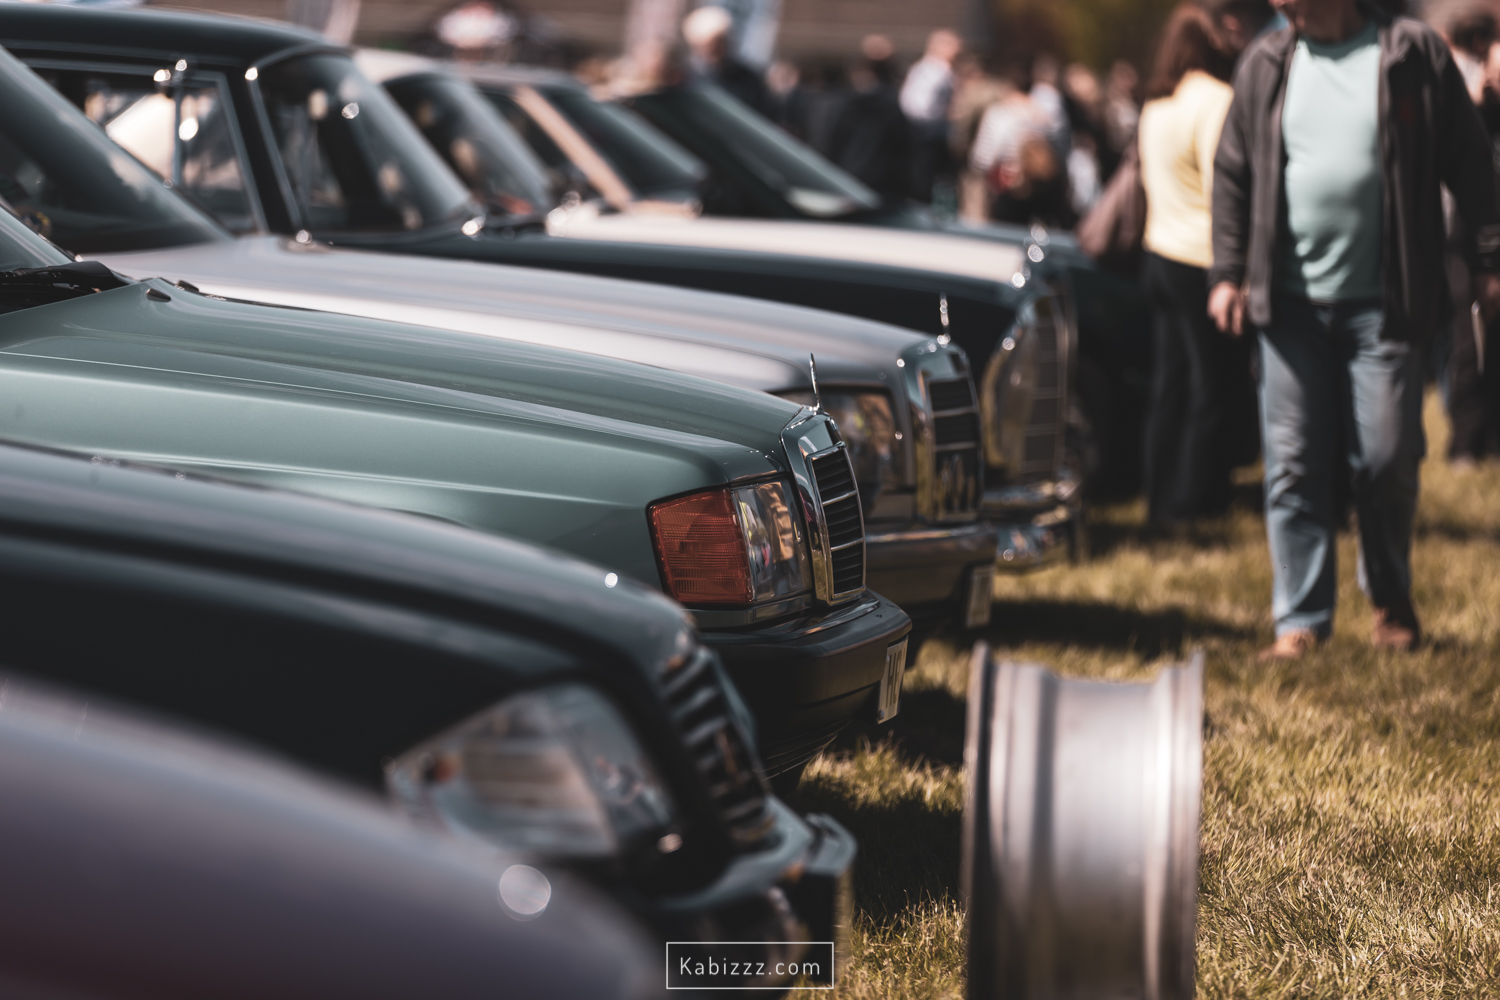 Kabizzz_Photography_Stirling_District_Classic _cars-86.jpg